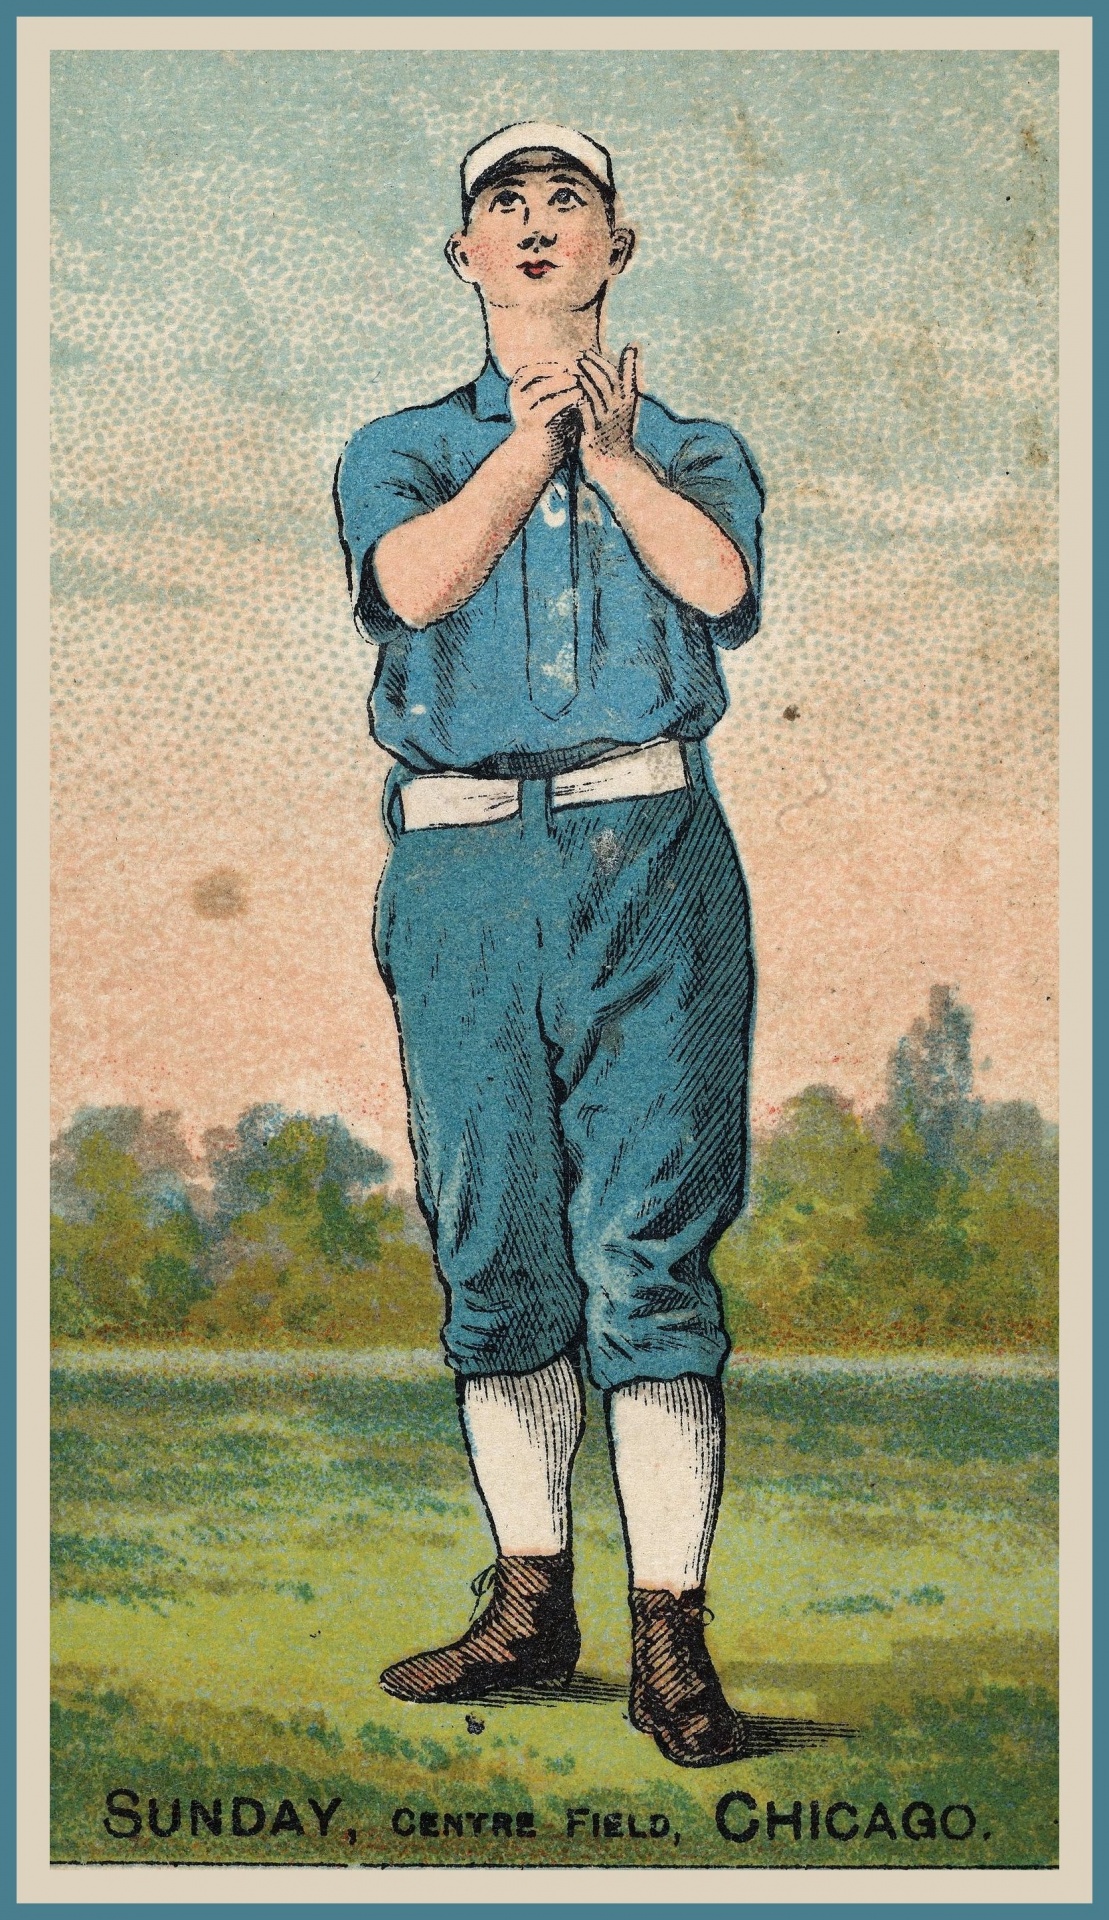 Vintage sport card and royalty free for a tobacco advertisement